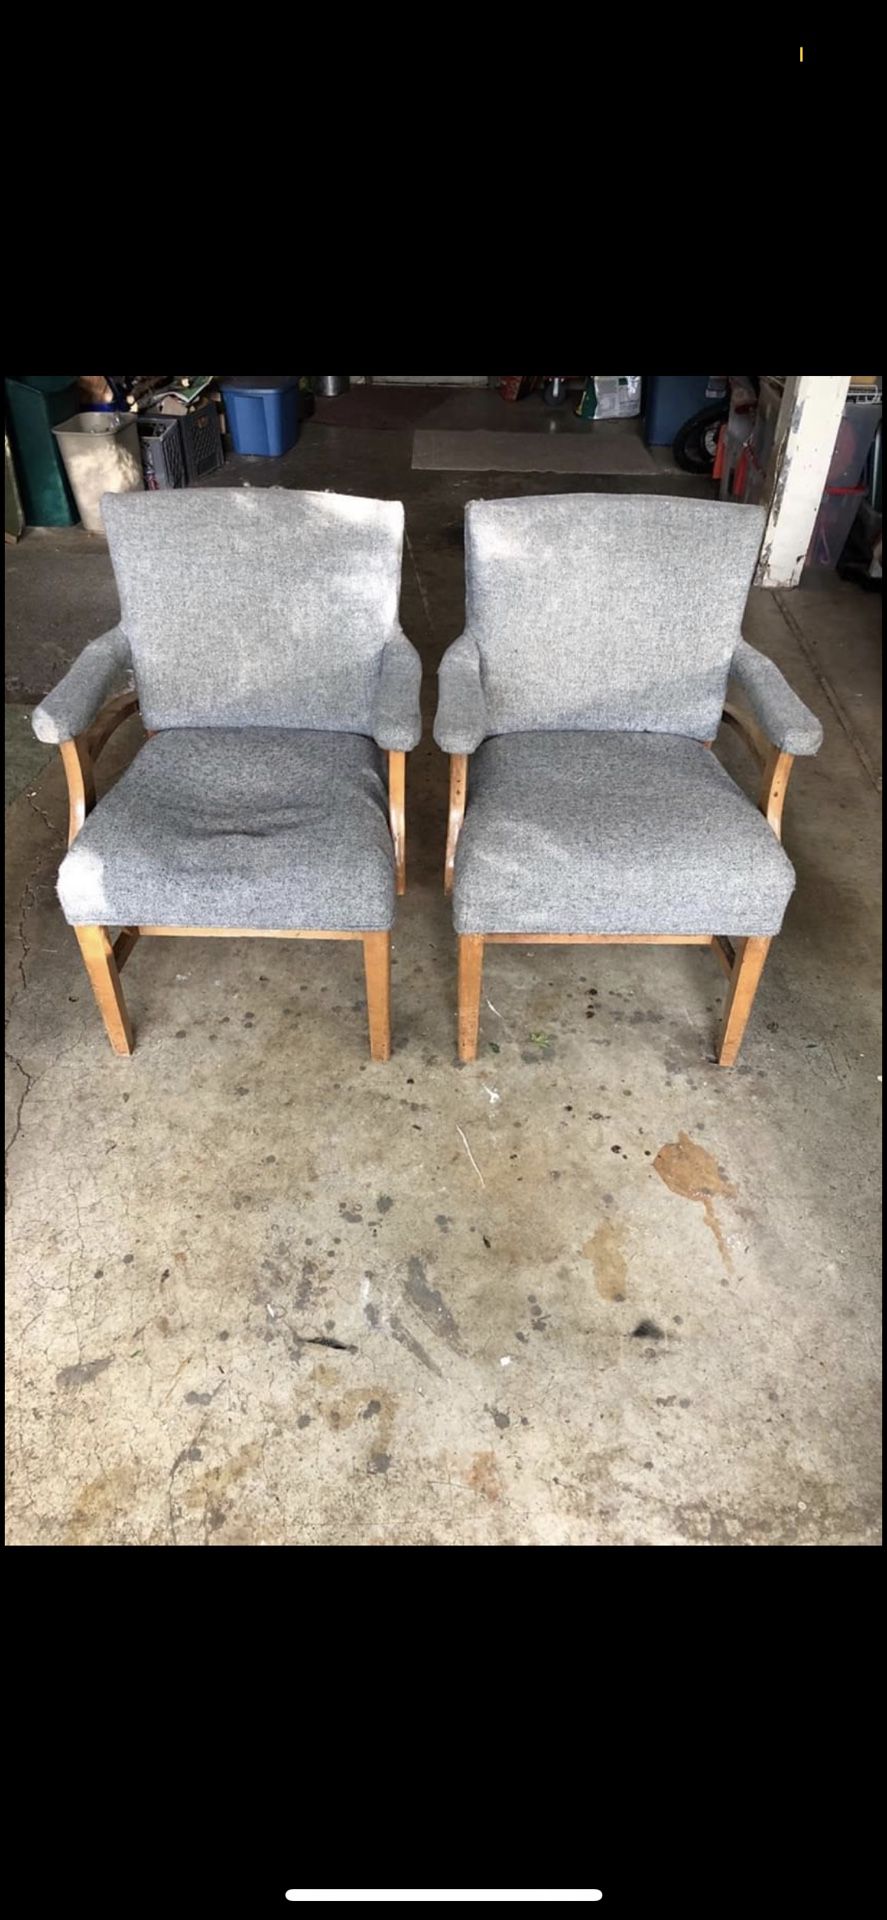 Nice reupholstered chairs!